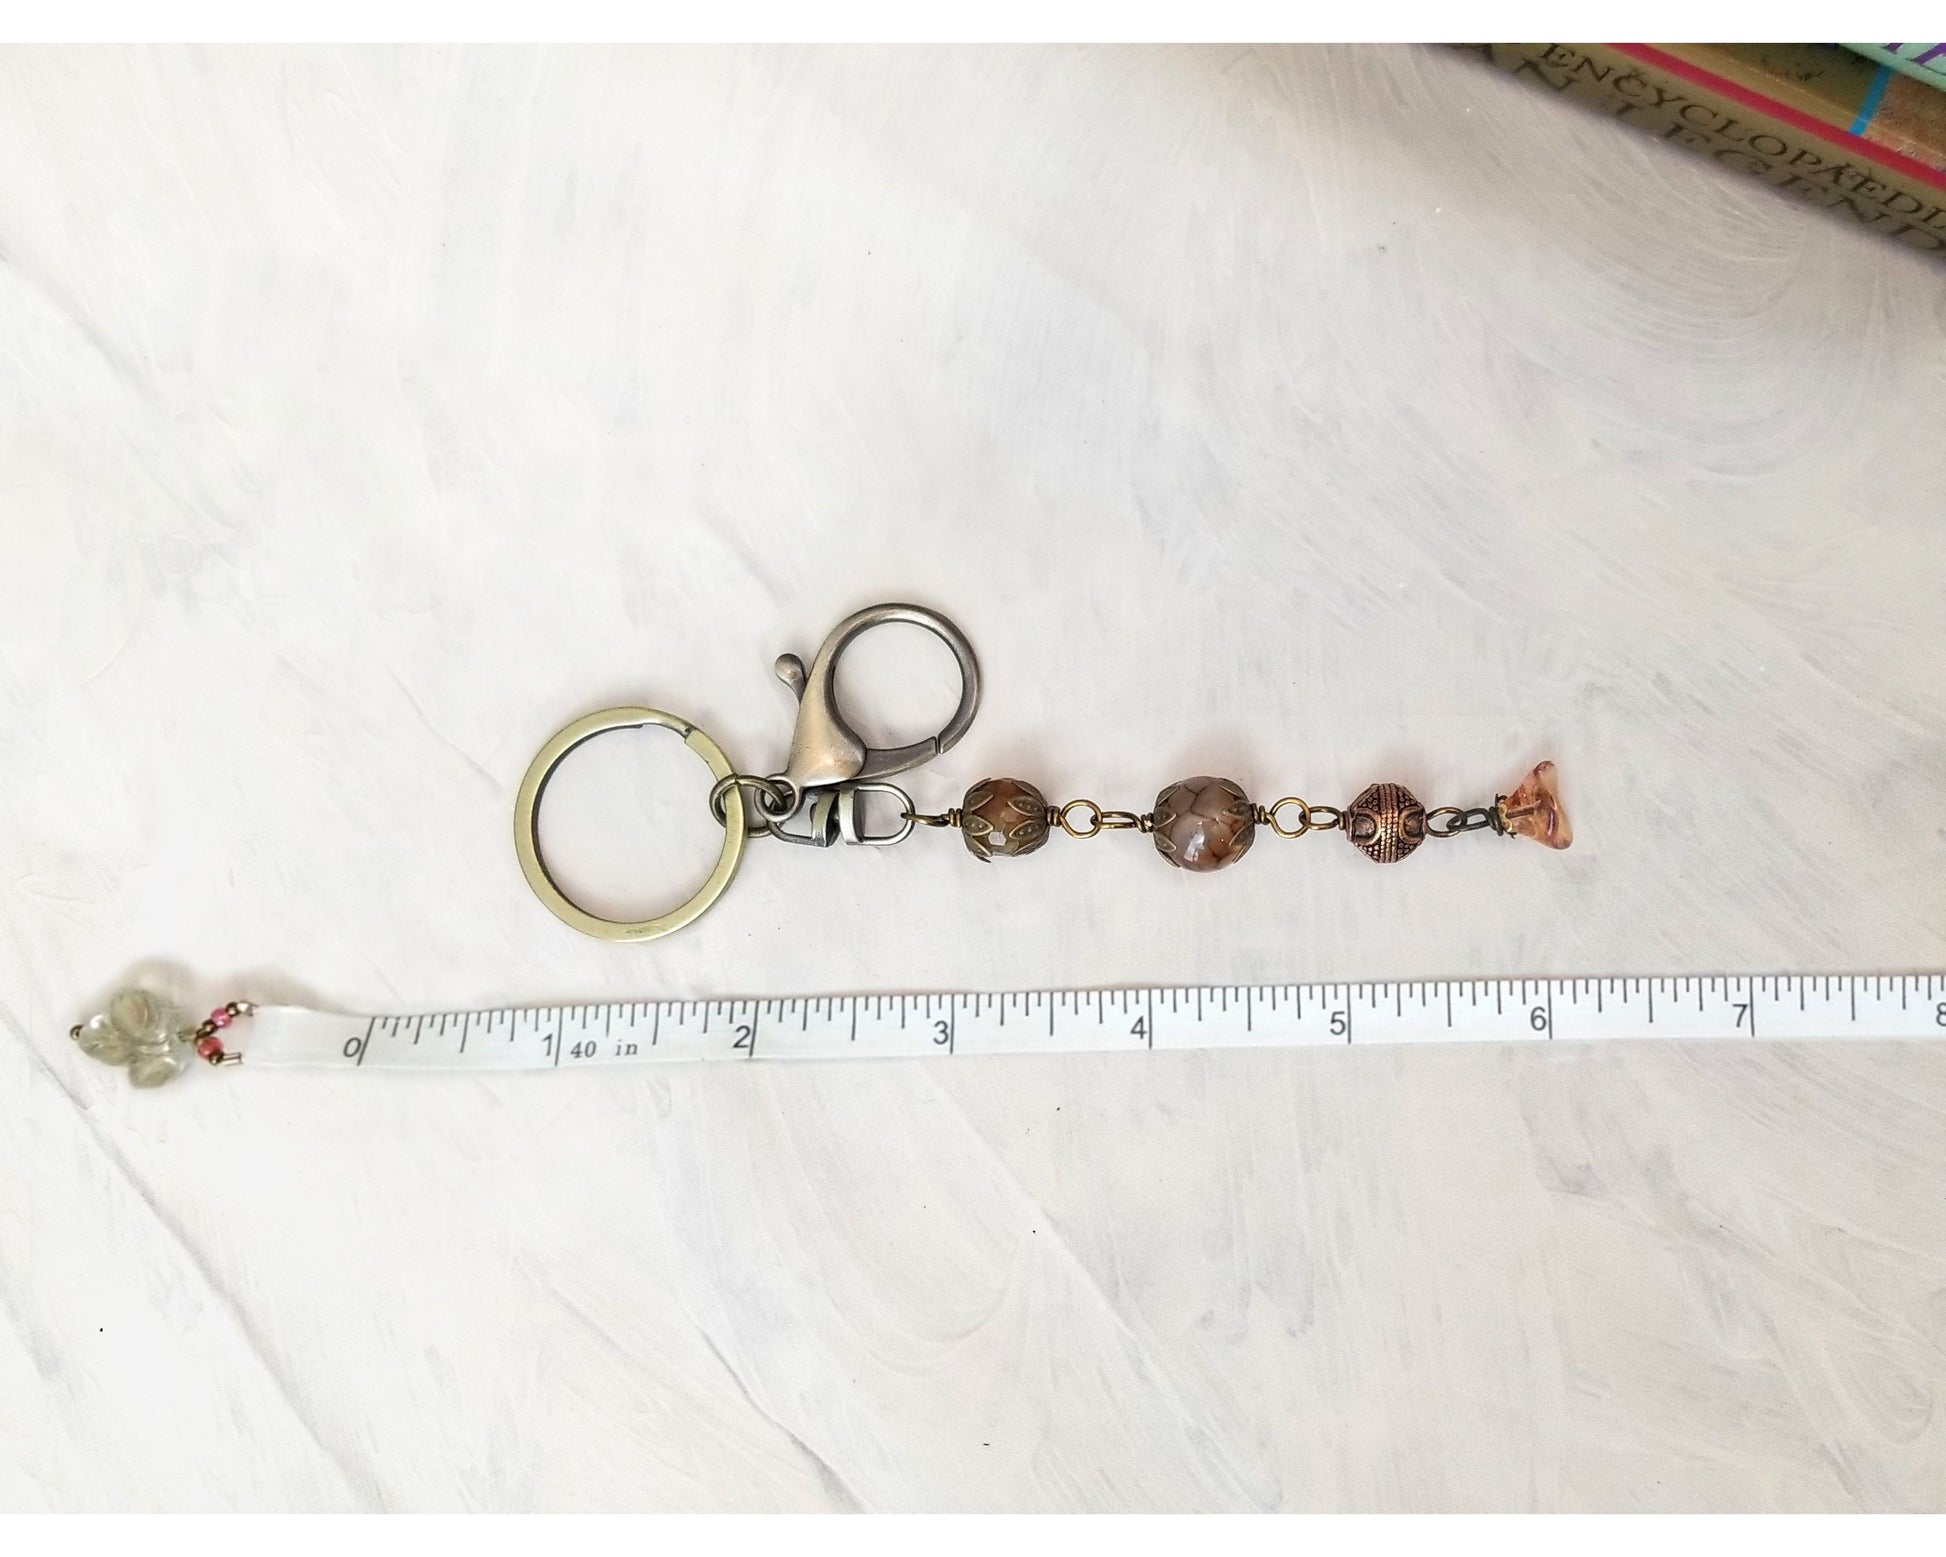 Key Ring with Wire Wrapped Fob in Earthy Browns, Garden, Party, Renaissance, Medieval, Fairytale, Choice of Colors and Metals